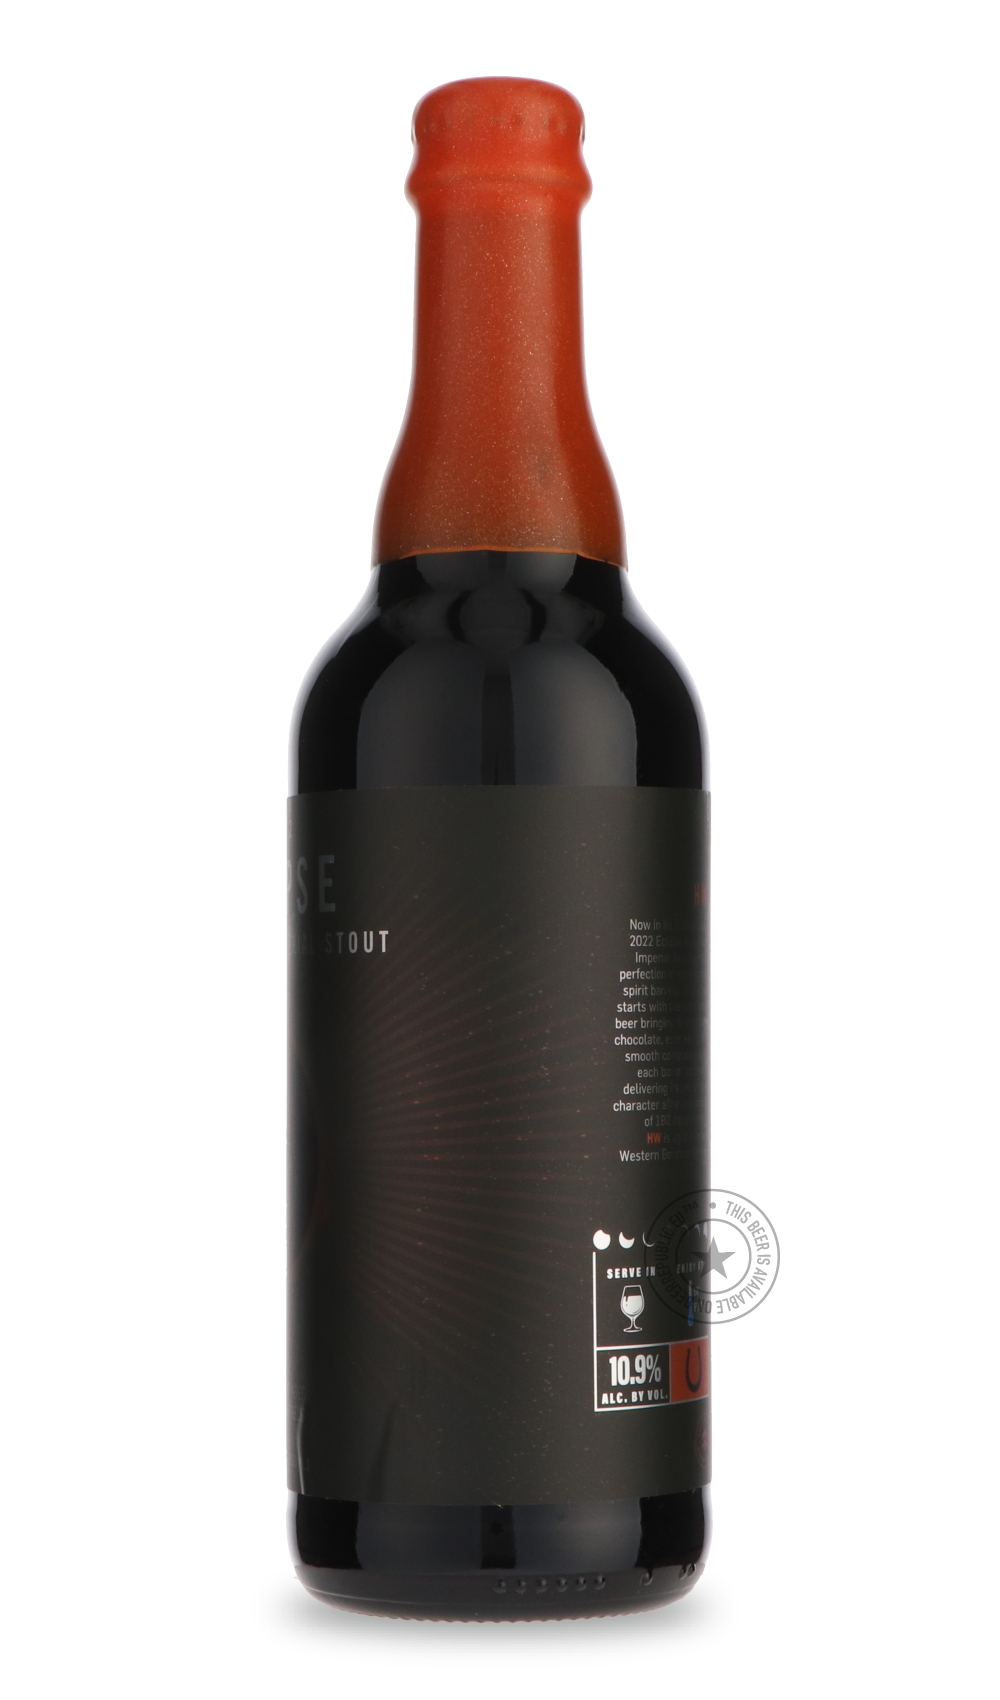 -FiftyFifty- Eclipse - High West Bourbon (2022)-Stout & Porter- Only @ Beer Republic - The best online beer store for American & Canadian craft beer - Buy beer online from the USA and Canada - Bier online kopen - Amerikaans bier kopen - Craft beer store - Craft beer kopen - Amerikanisch bier kaufen - Bier online kaufen - Acheter biere online - IPA - Stout - Porter - New England IPA - Hazy IPA - Imperial Stout - Barrel Aged - Barrel Aged Imperial Stout - Brown - Dark beer - Blond - Blonde - Pilsner - Lager -